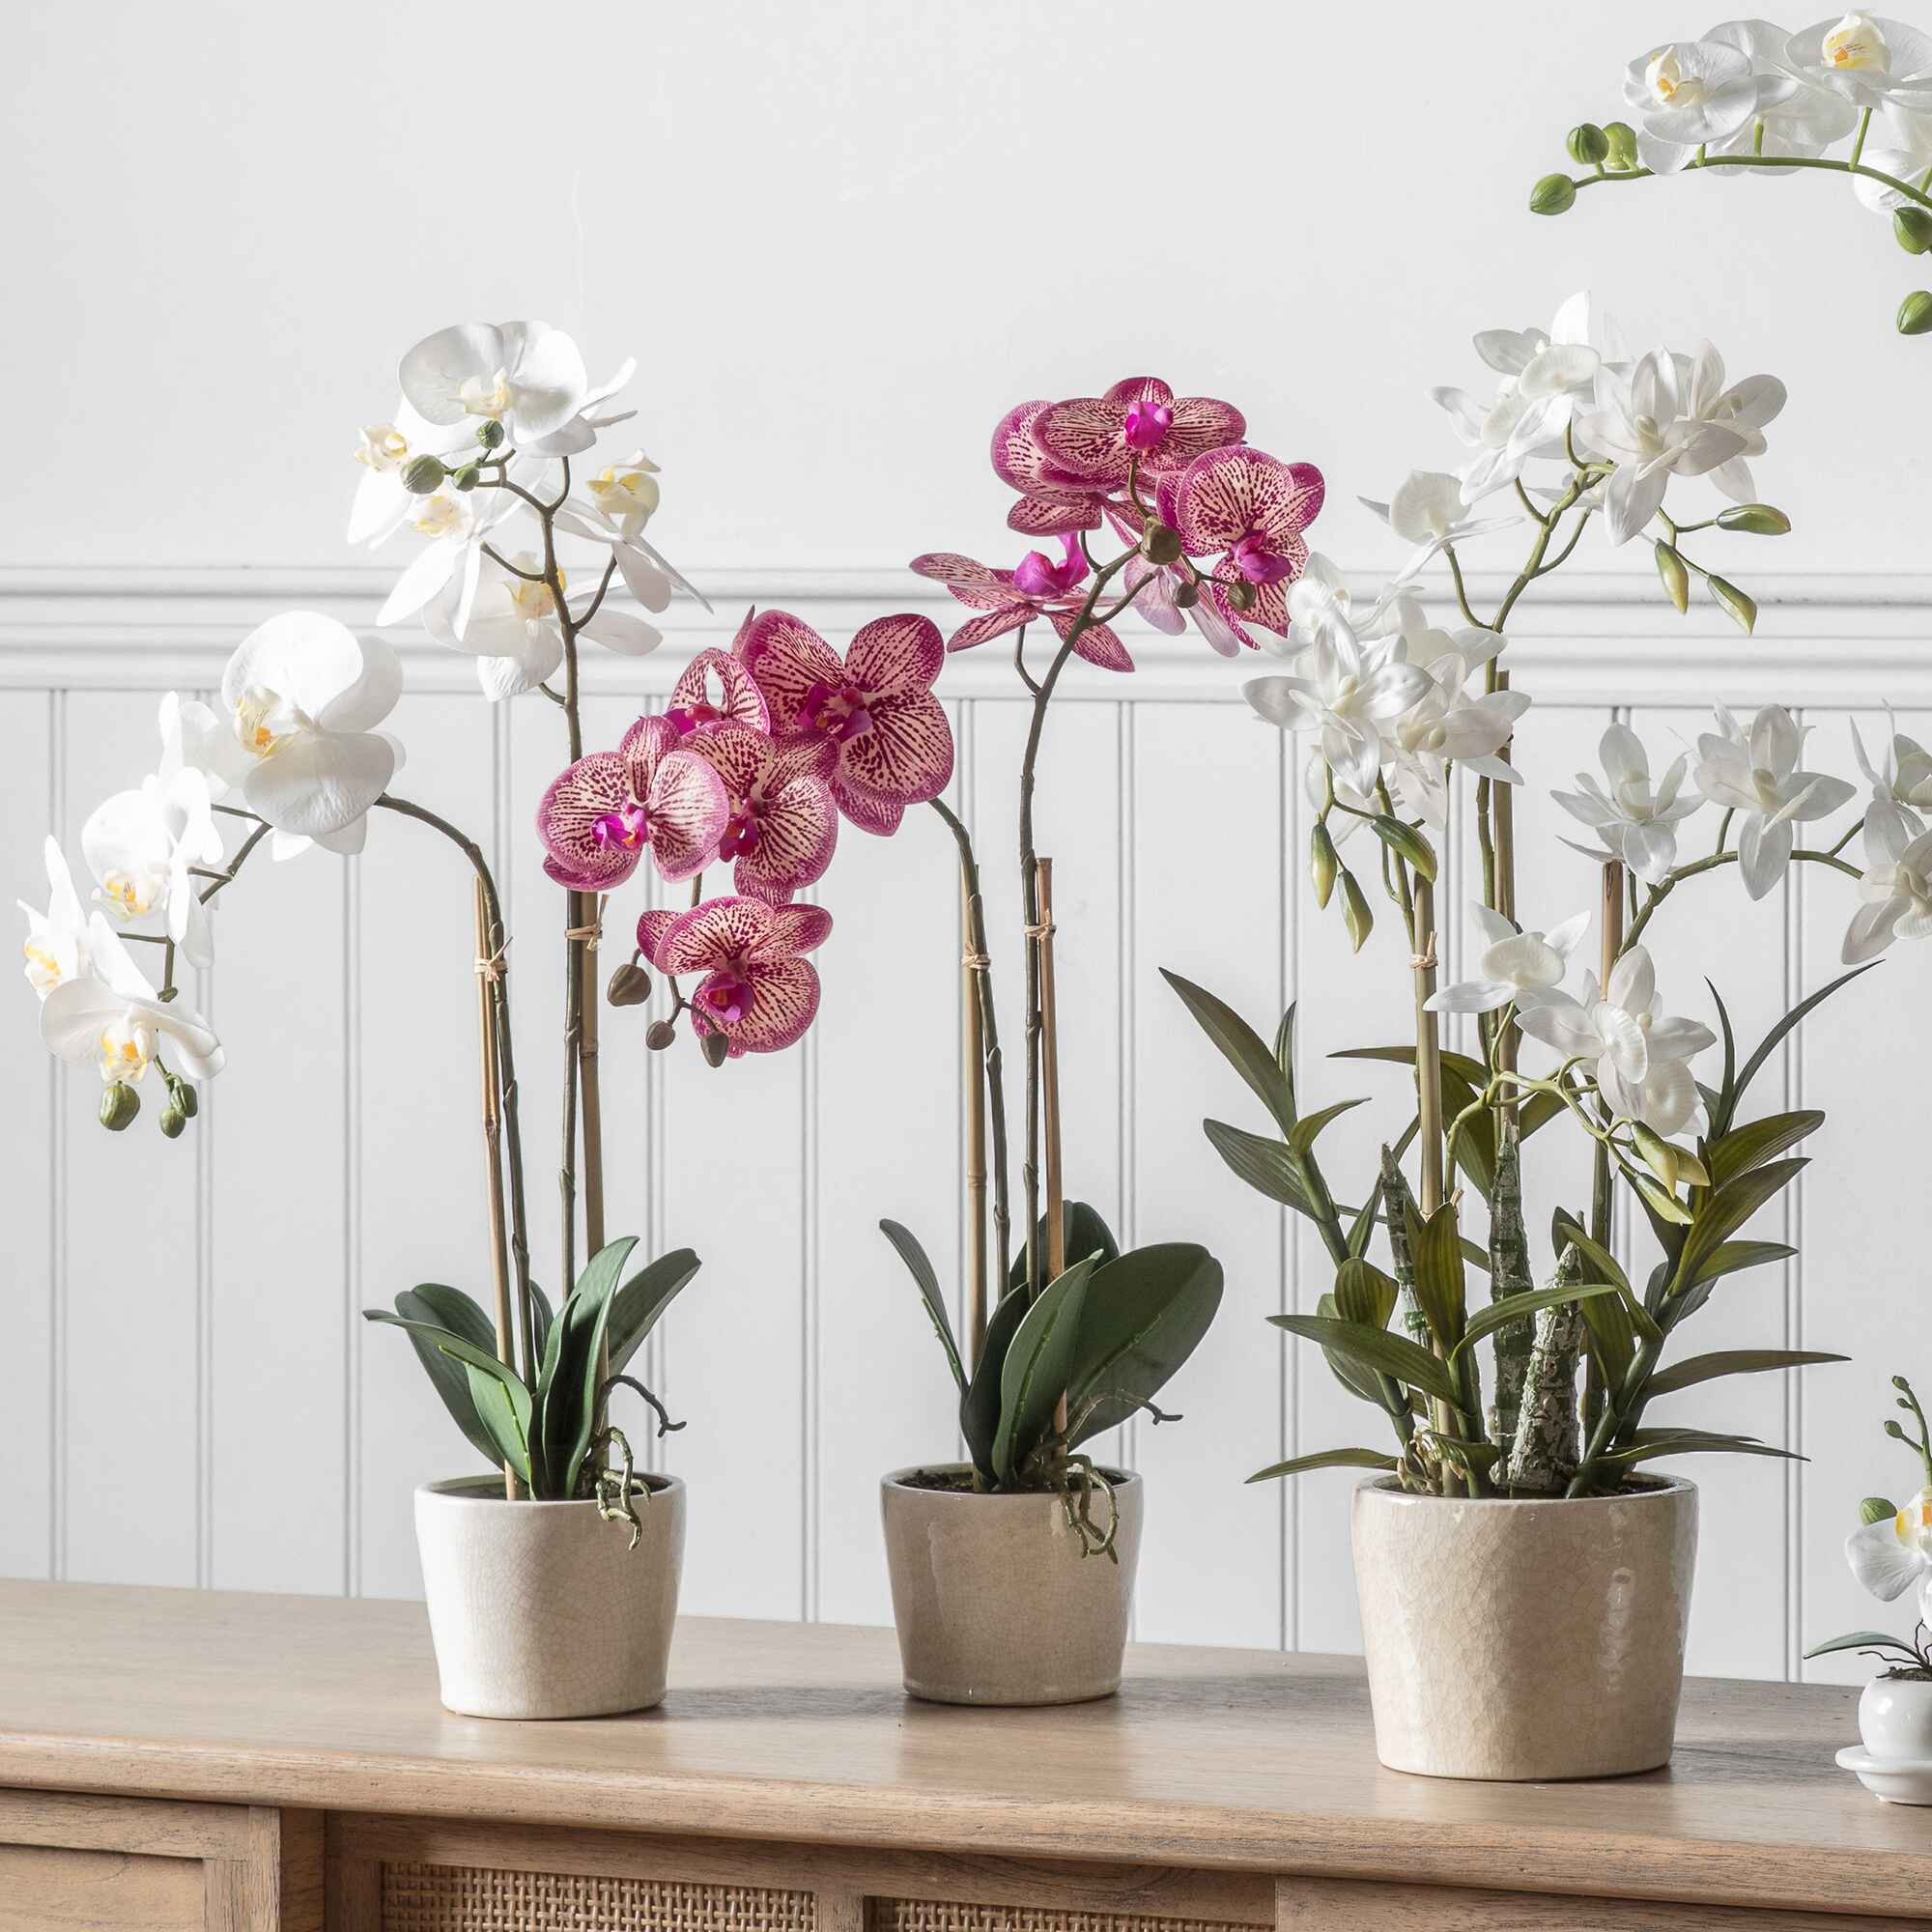 Summer House Plants You’ll Love This Year | Fishpools